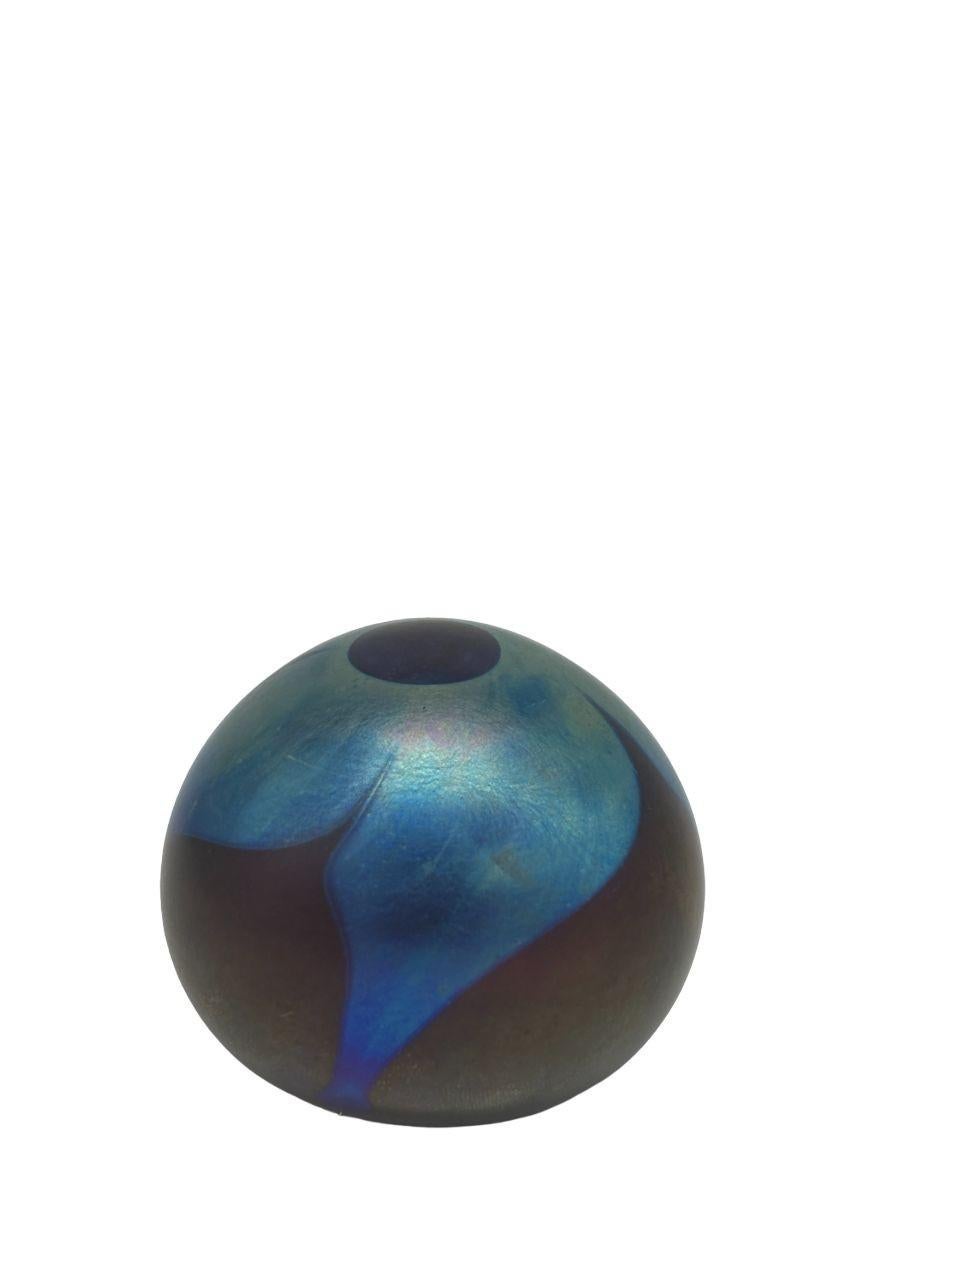 Late 20th Century Signed 1975 John Barber Studio Art Glass Swirl Paperweight Weight - Blue Chrome For Sale